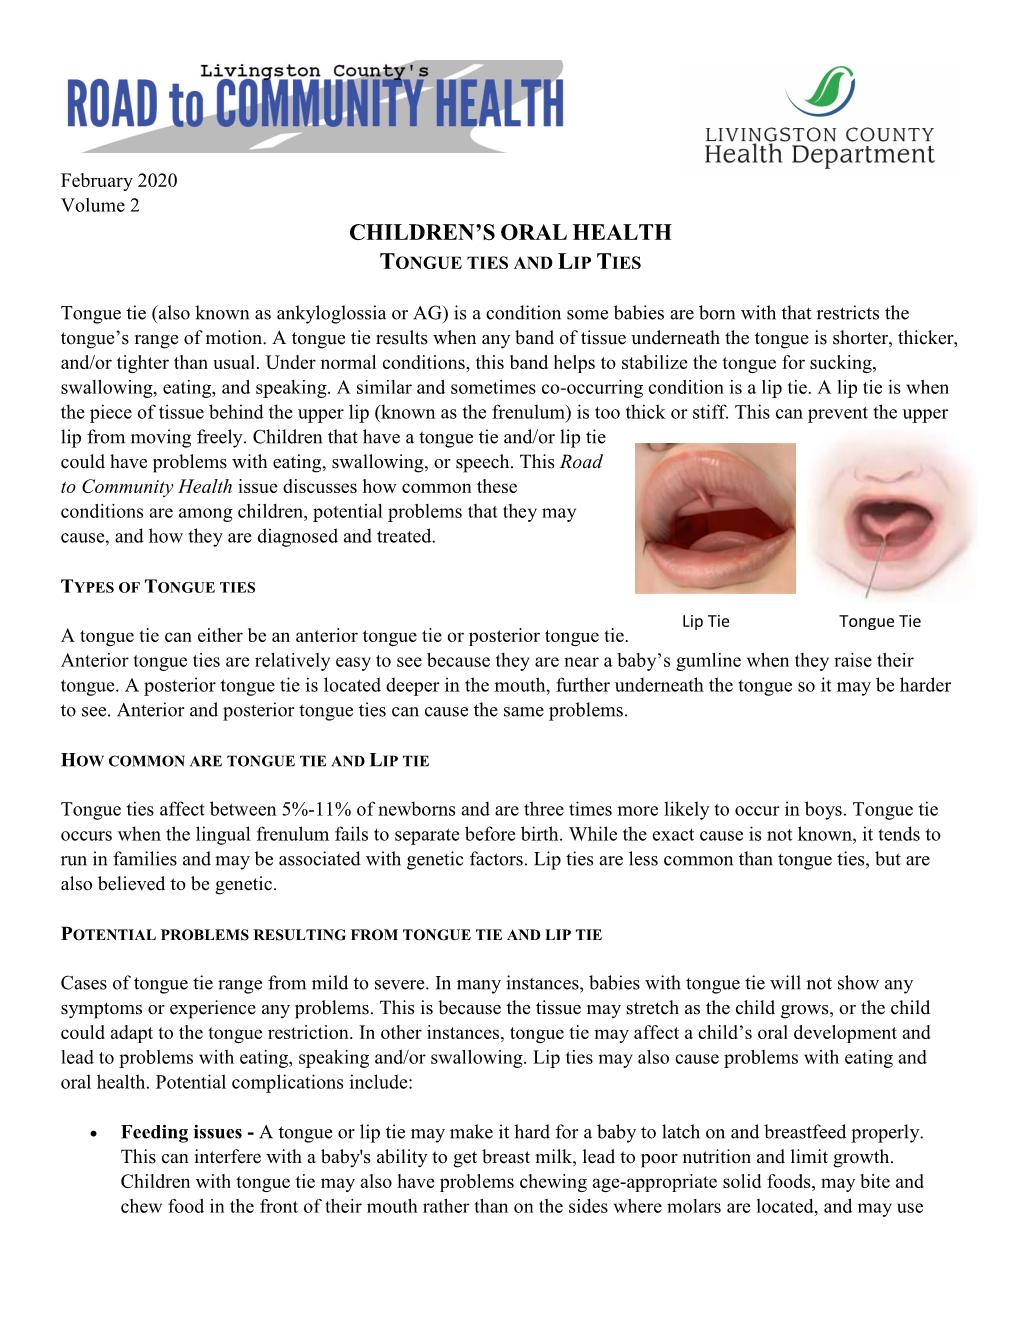 Children's Oral Health Tongue Ties and Lip Ties